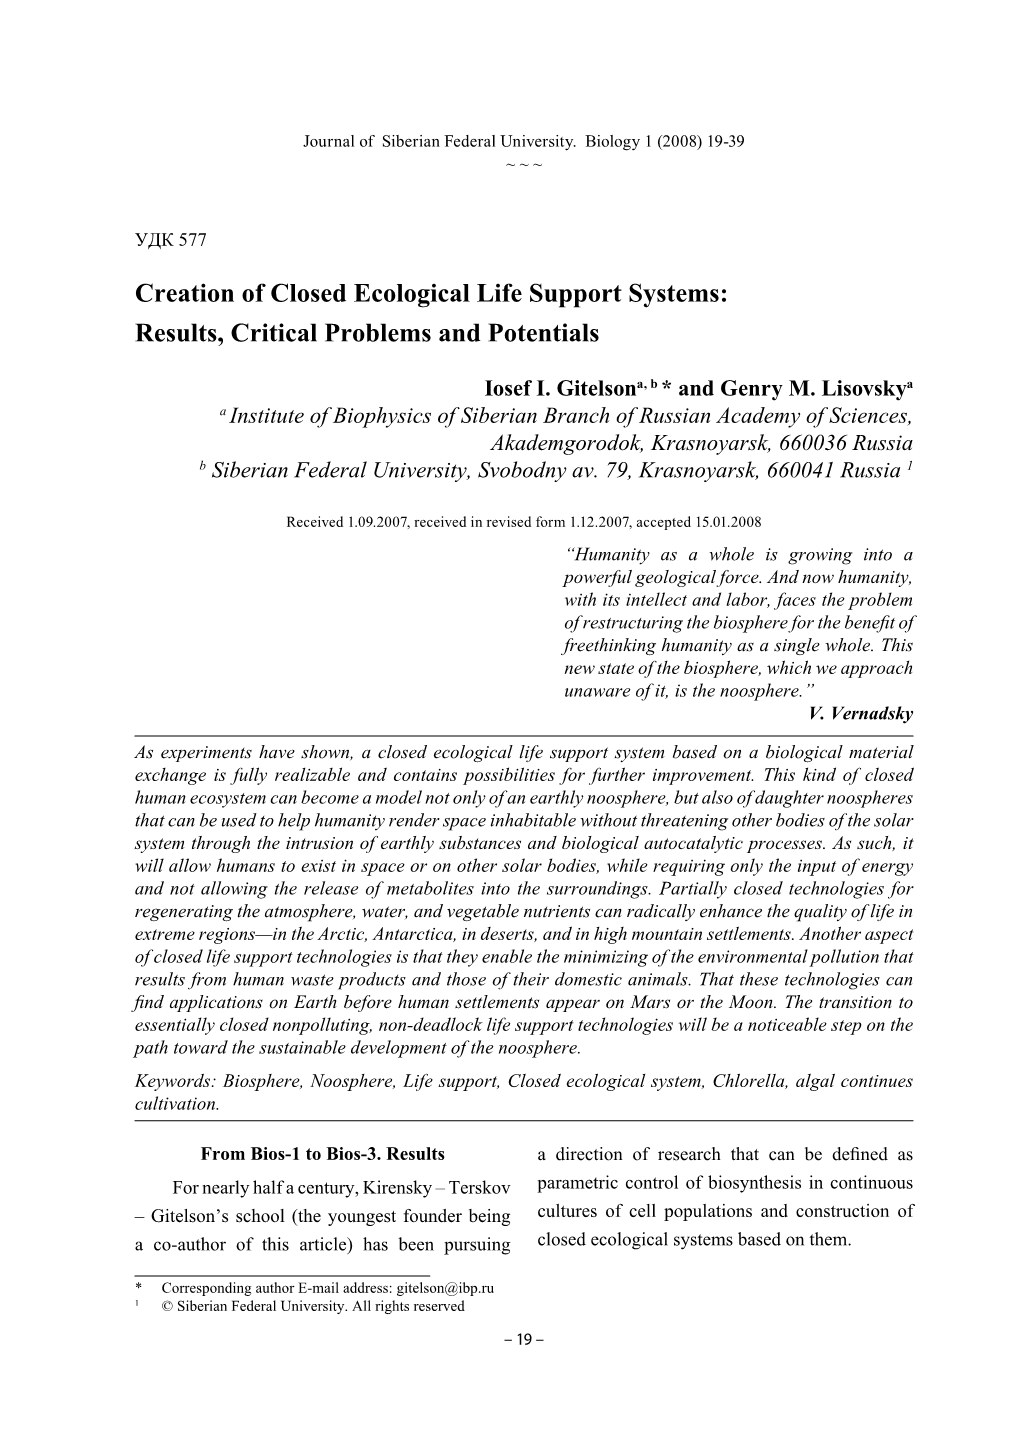 Creation of Closed Ecological Life Support Systems…